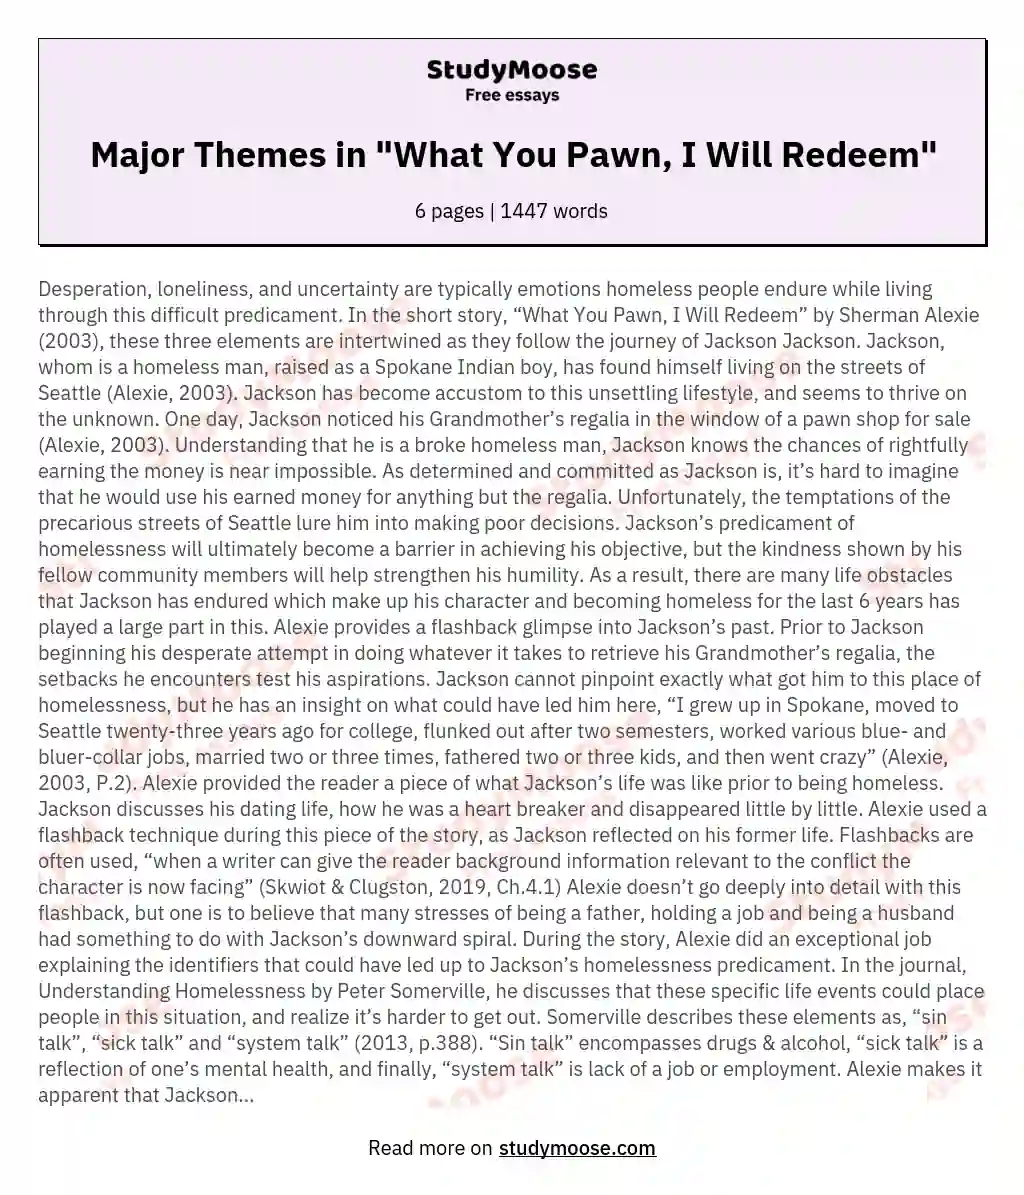 Major Themes in "What You Pawn, I Will Redeem" essay